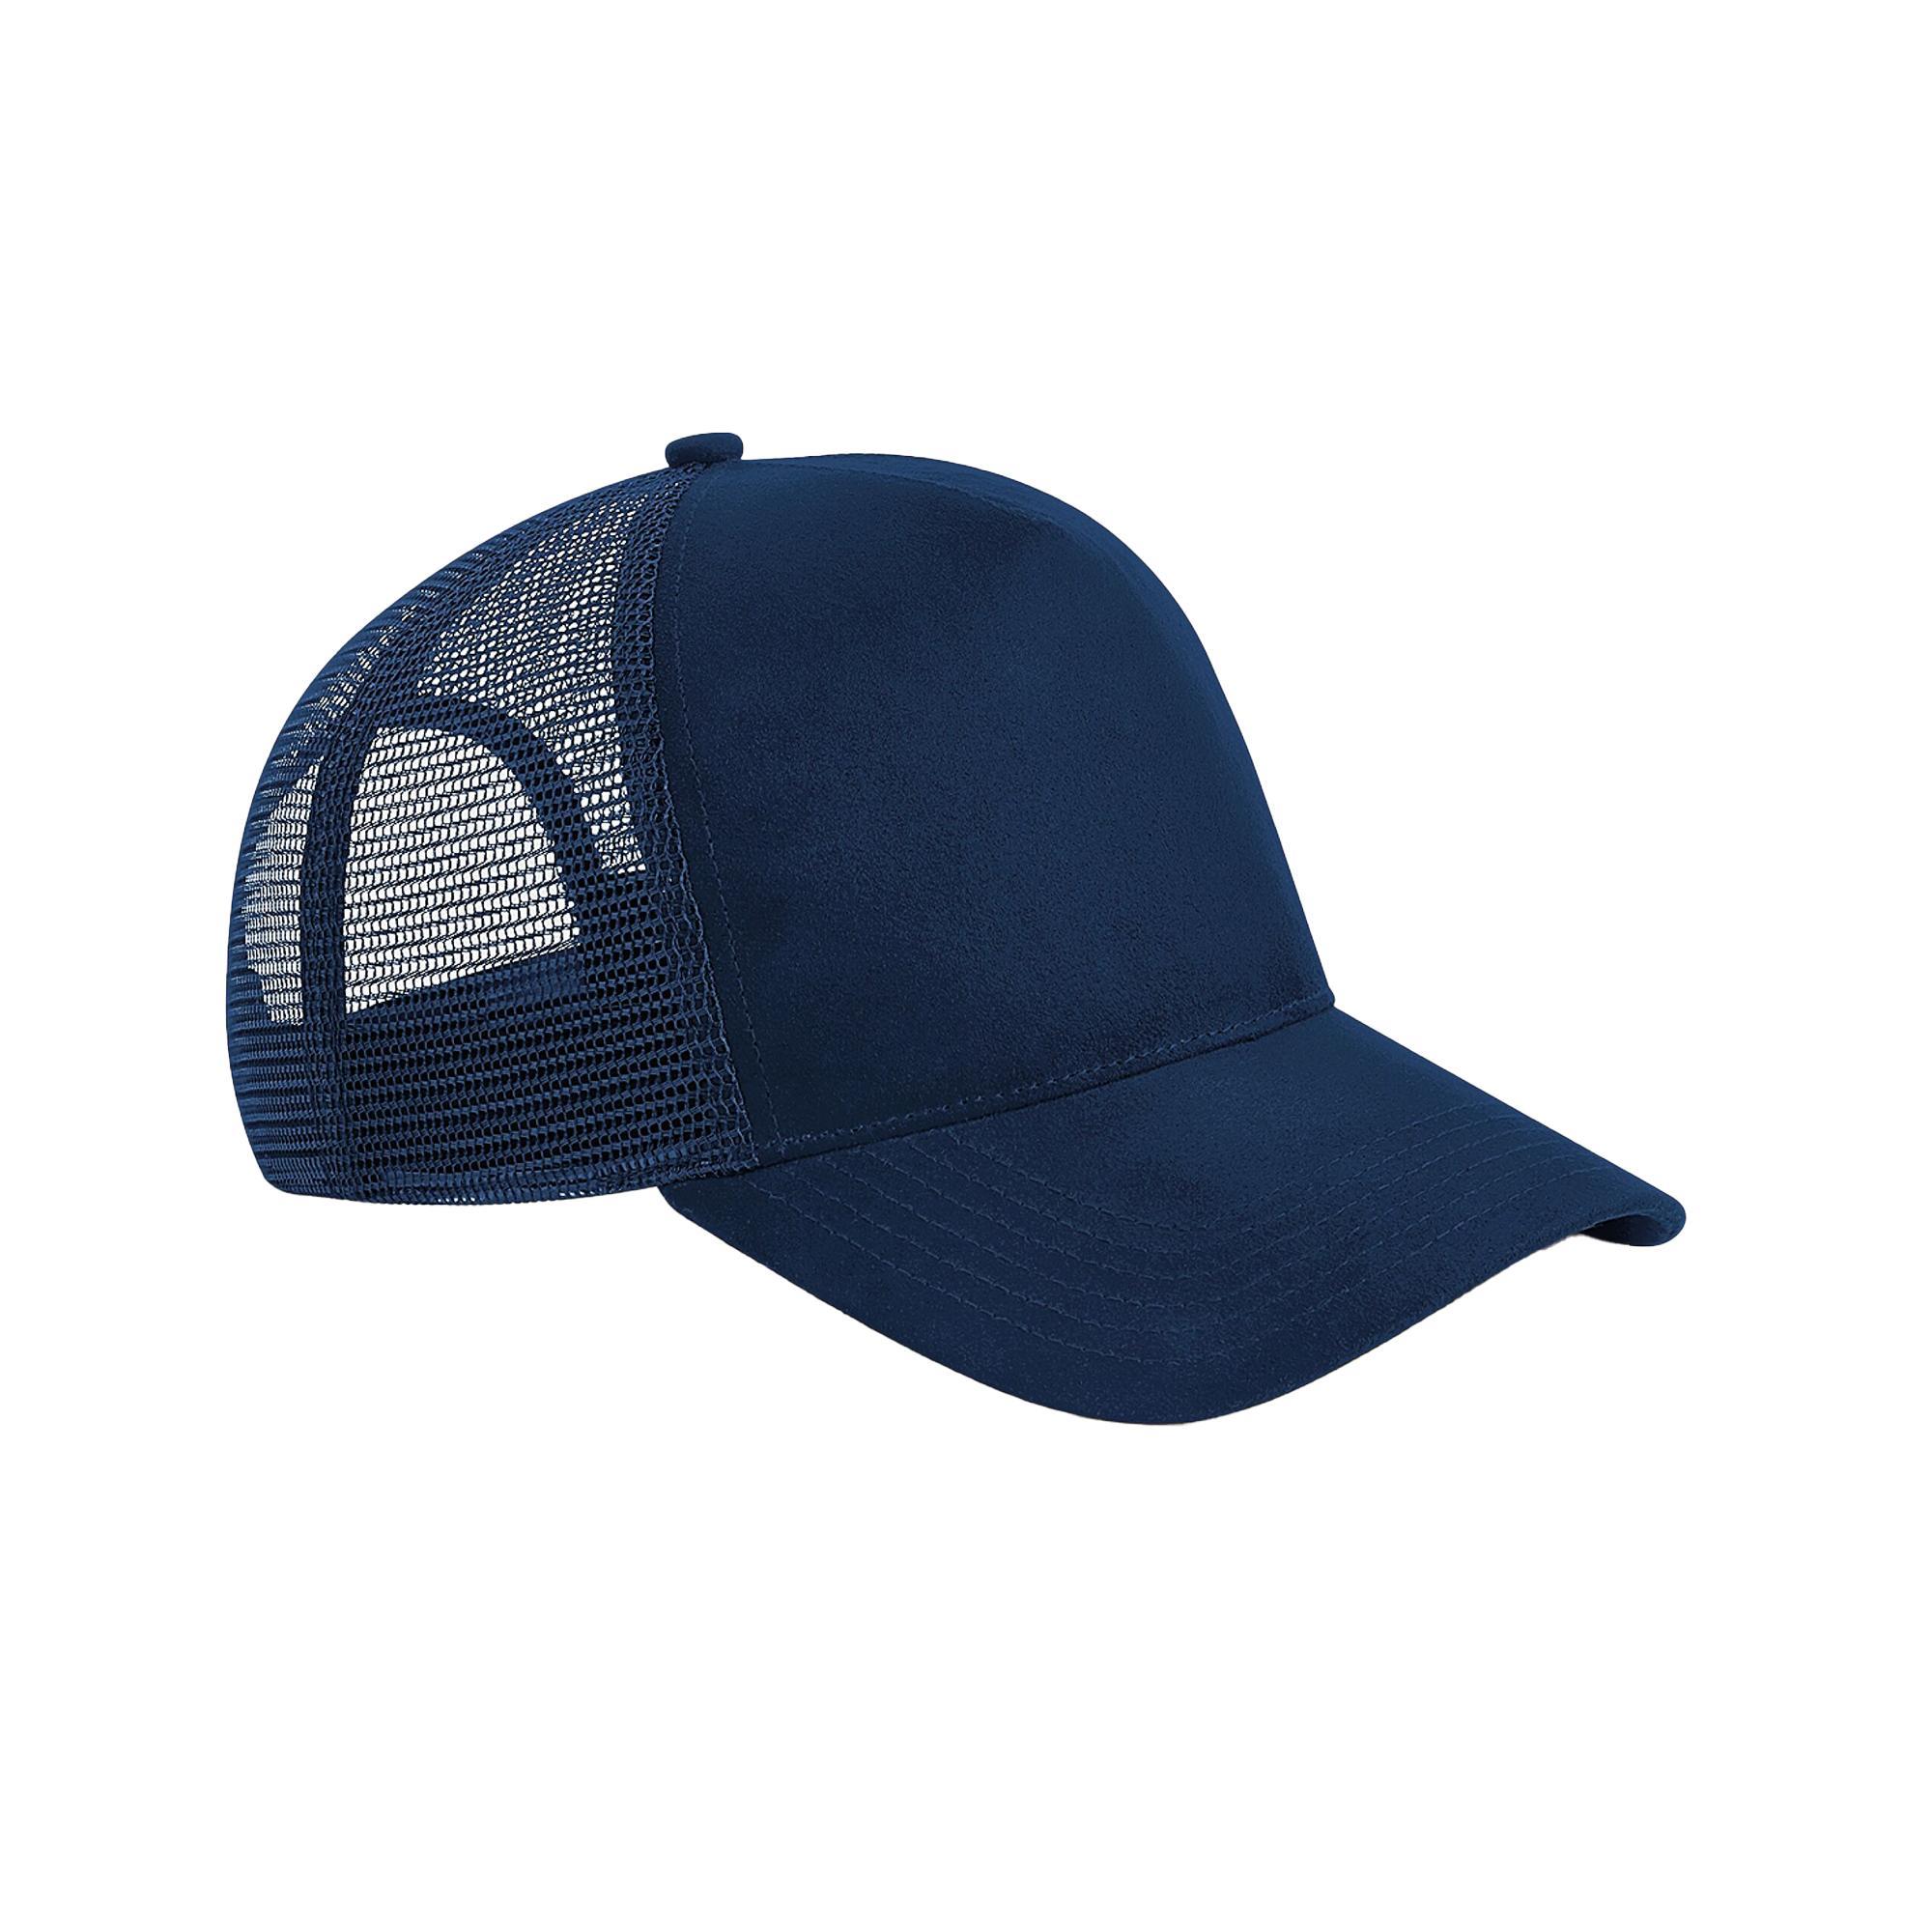 Beechfield Unisex Adult Suede Snapback Trucker Cap (French Navy) (One Size)